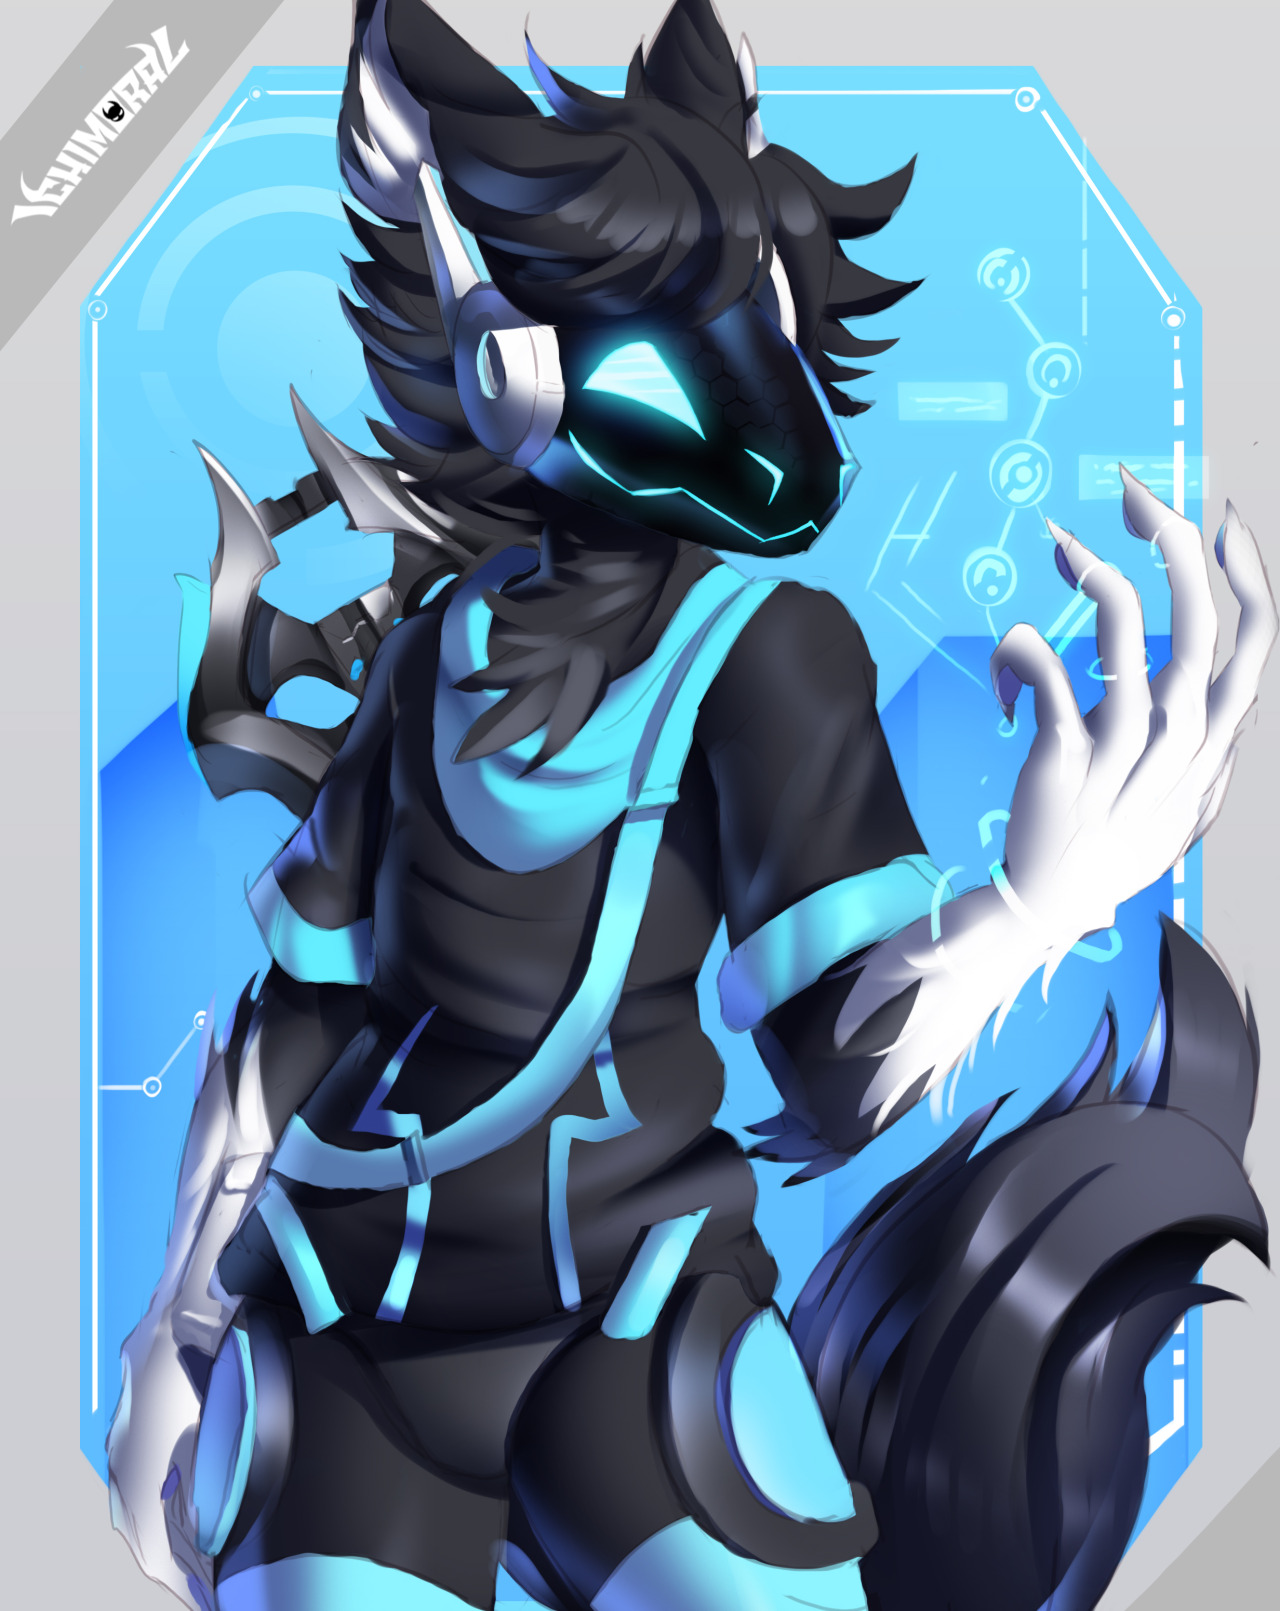 Ichimoral Artworks (Commissions open) — Protogen commission for